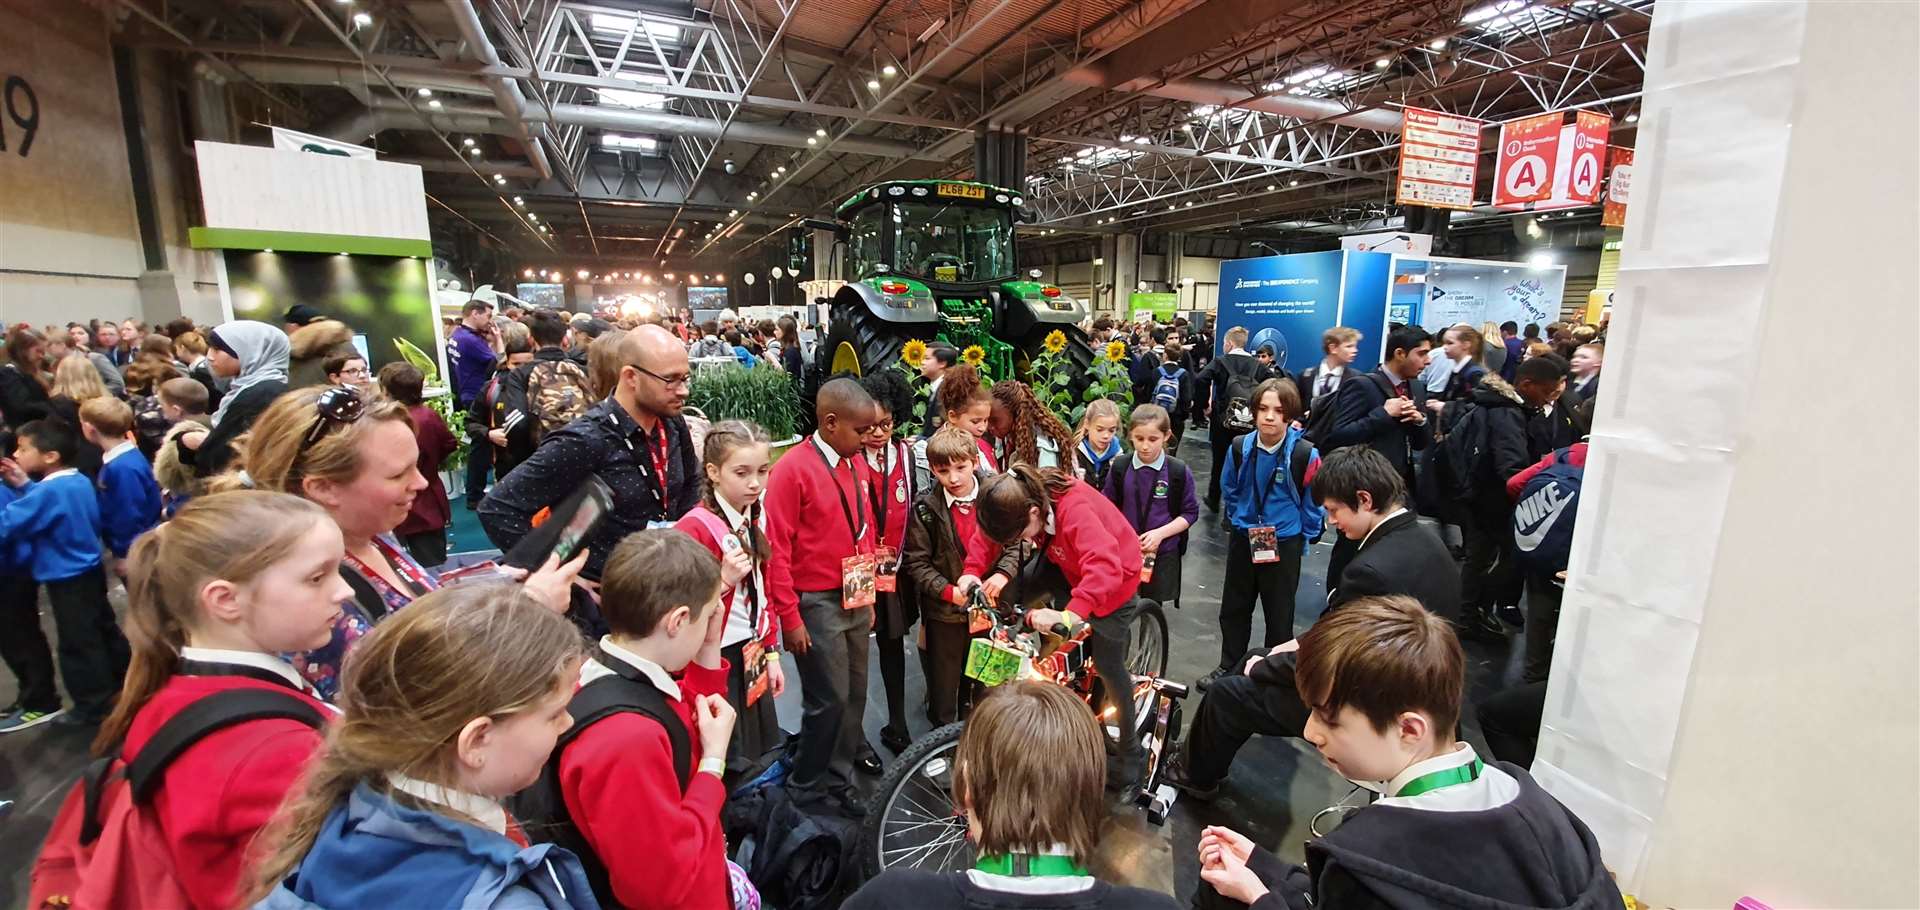 The Wick High School Light Bike was a popular attraction at the Big Bang Fair in Birmingham.